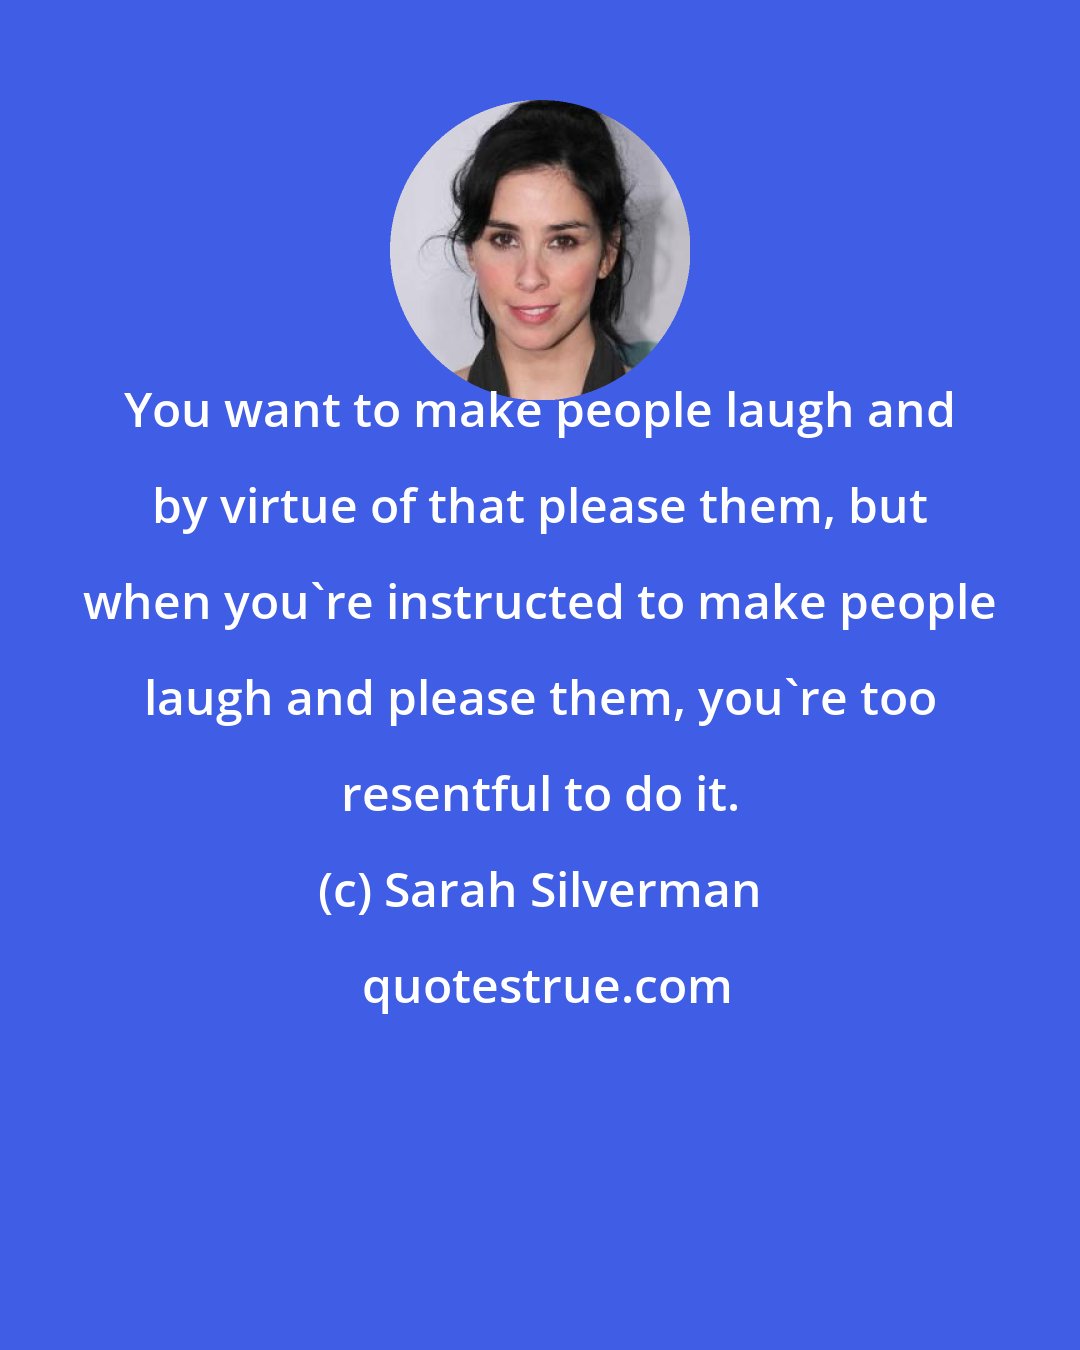 Sarah Silverman: You want to make people laugh and by virtue of that please them, but when you're instructed to make people laugh and please them, you're too resentful to do it.